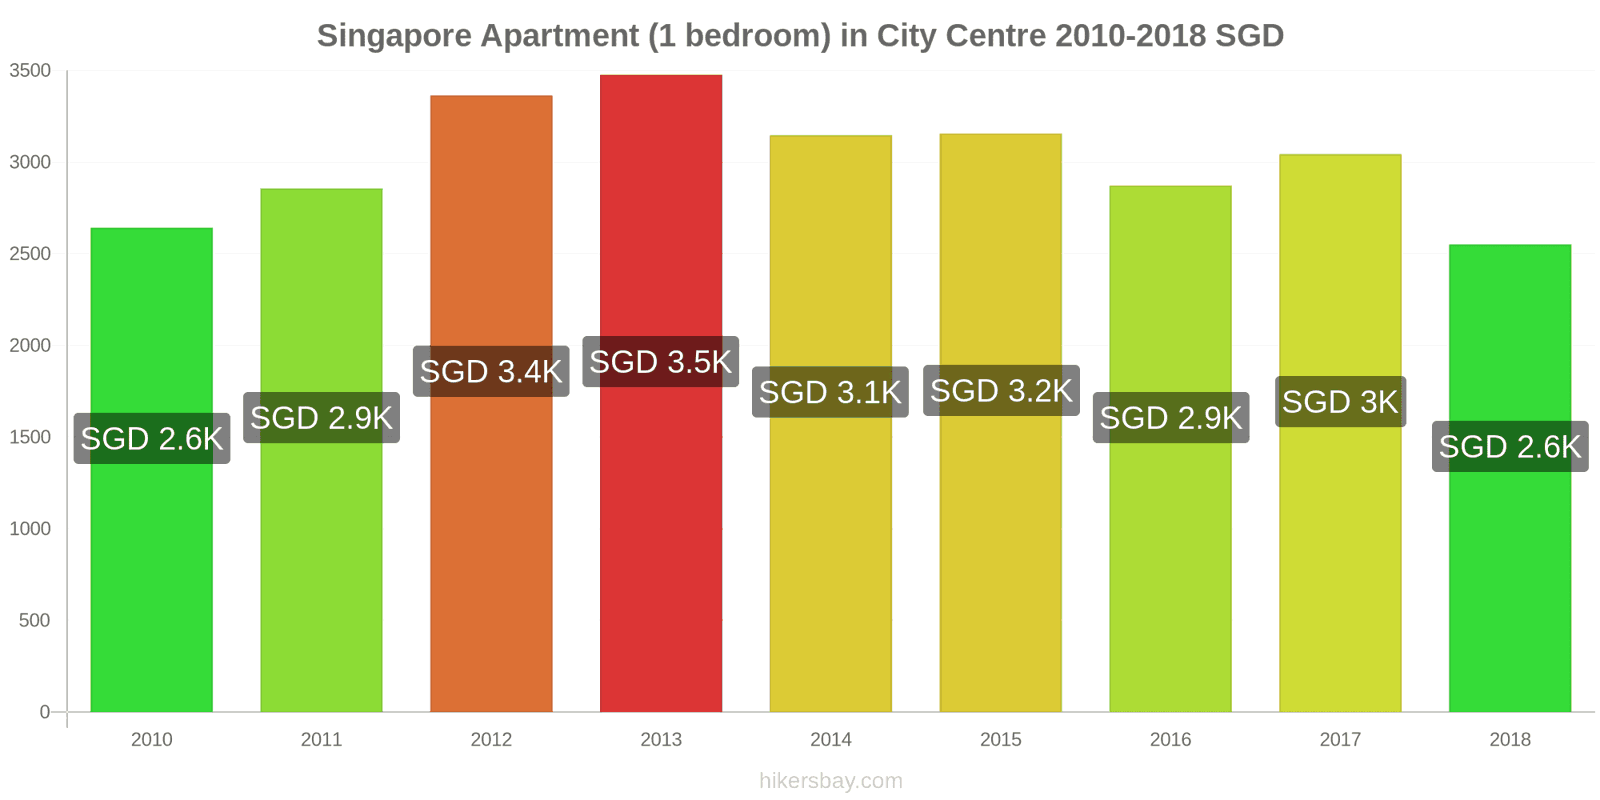 Singapore price changes Apartment (1 bedroom) in city centre hikersbay.com